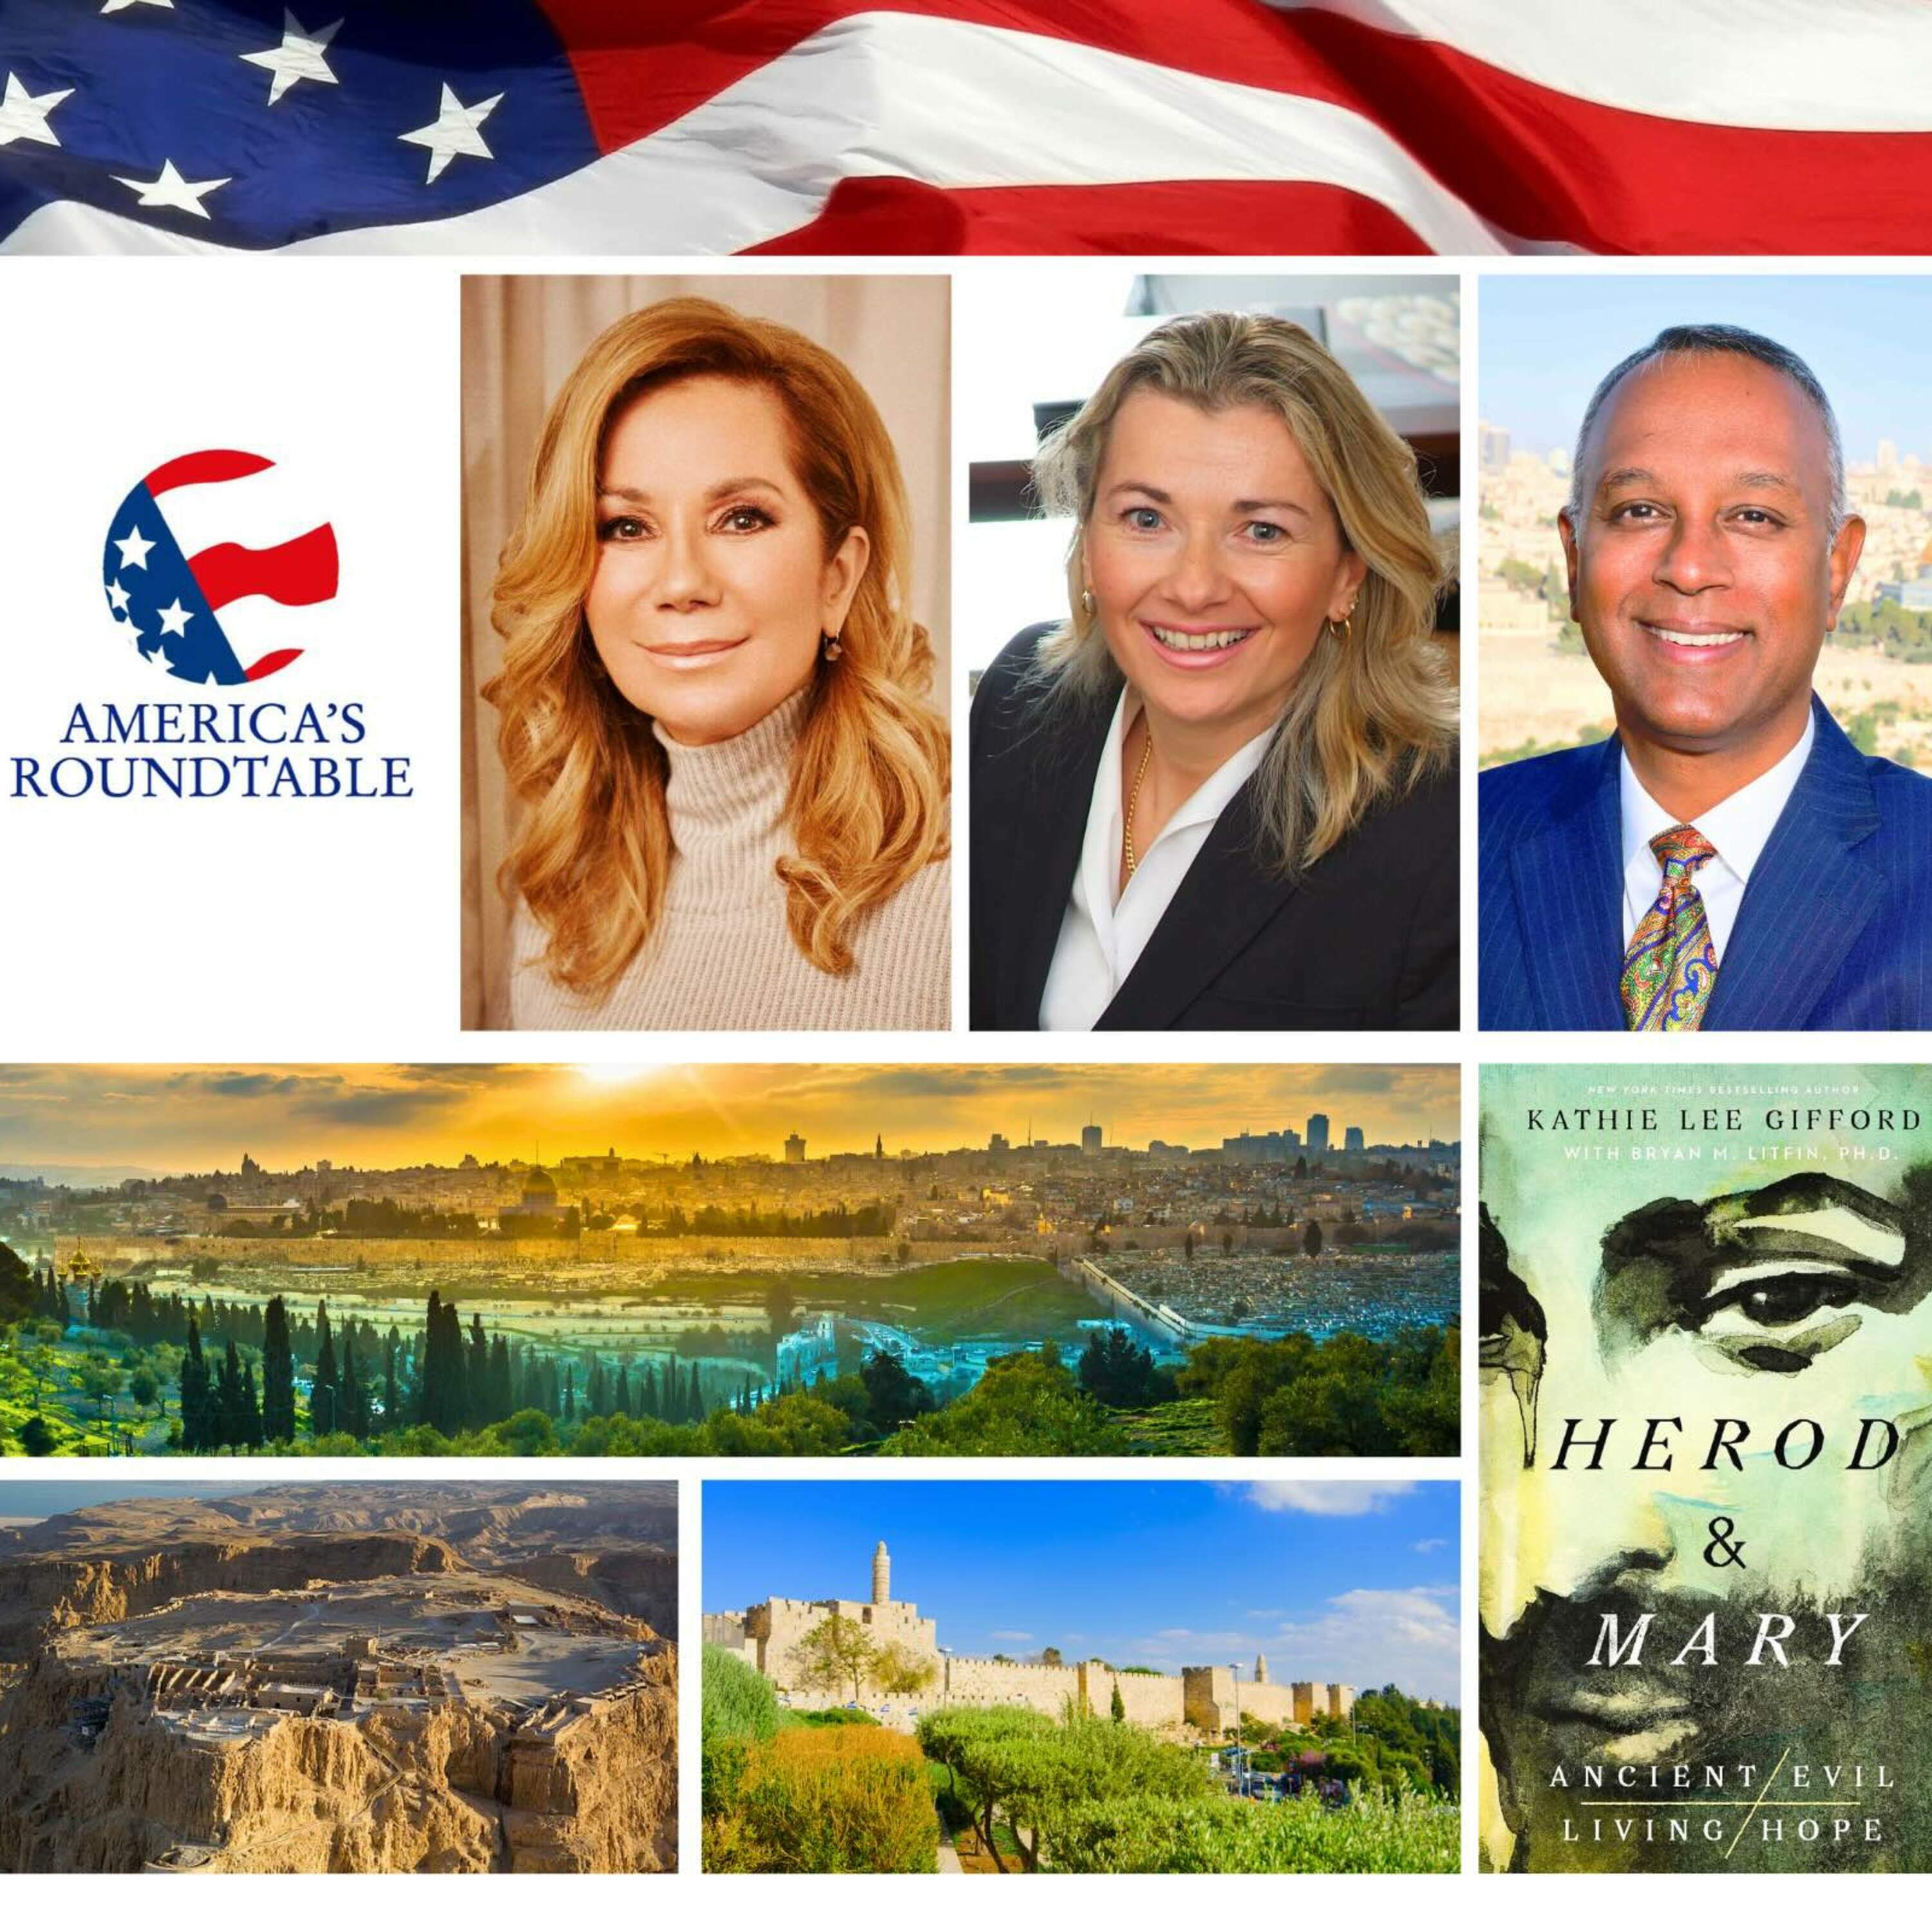 America's Roundtable with Kathie Lee Gifford | NY Times Bestselling Author: "Herod and Mary: Ancient Evil, Living Hope"